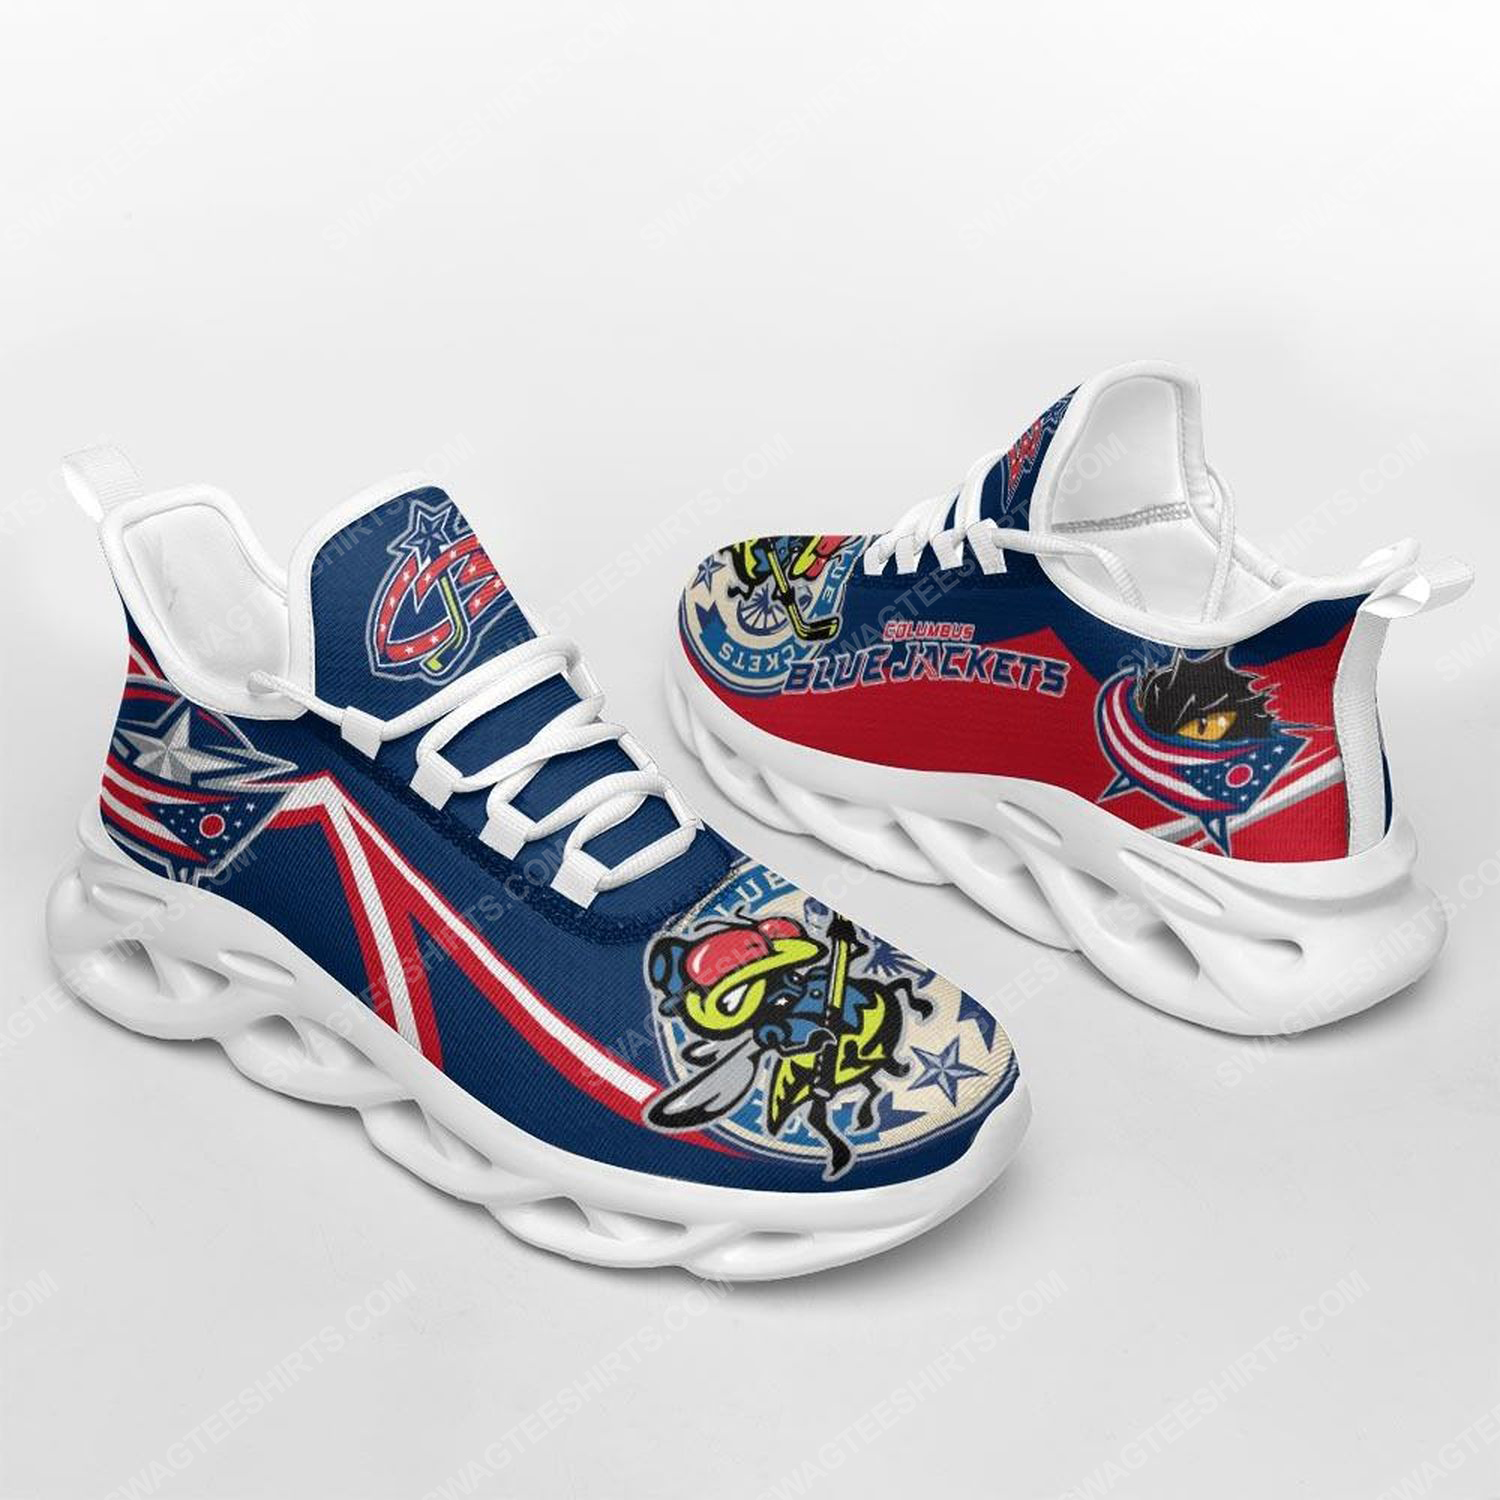 [special edition] The columbus blue jackets hockey team max soul shoes – Maria